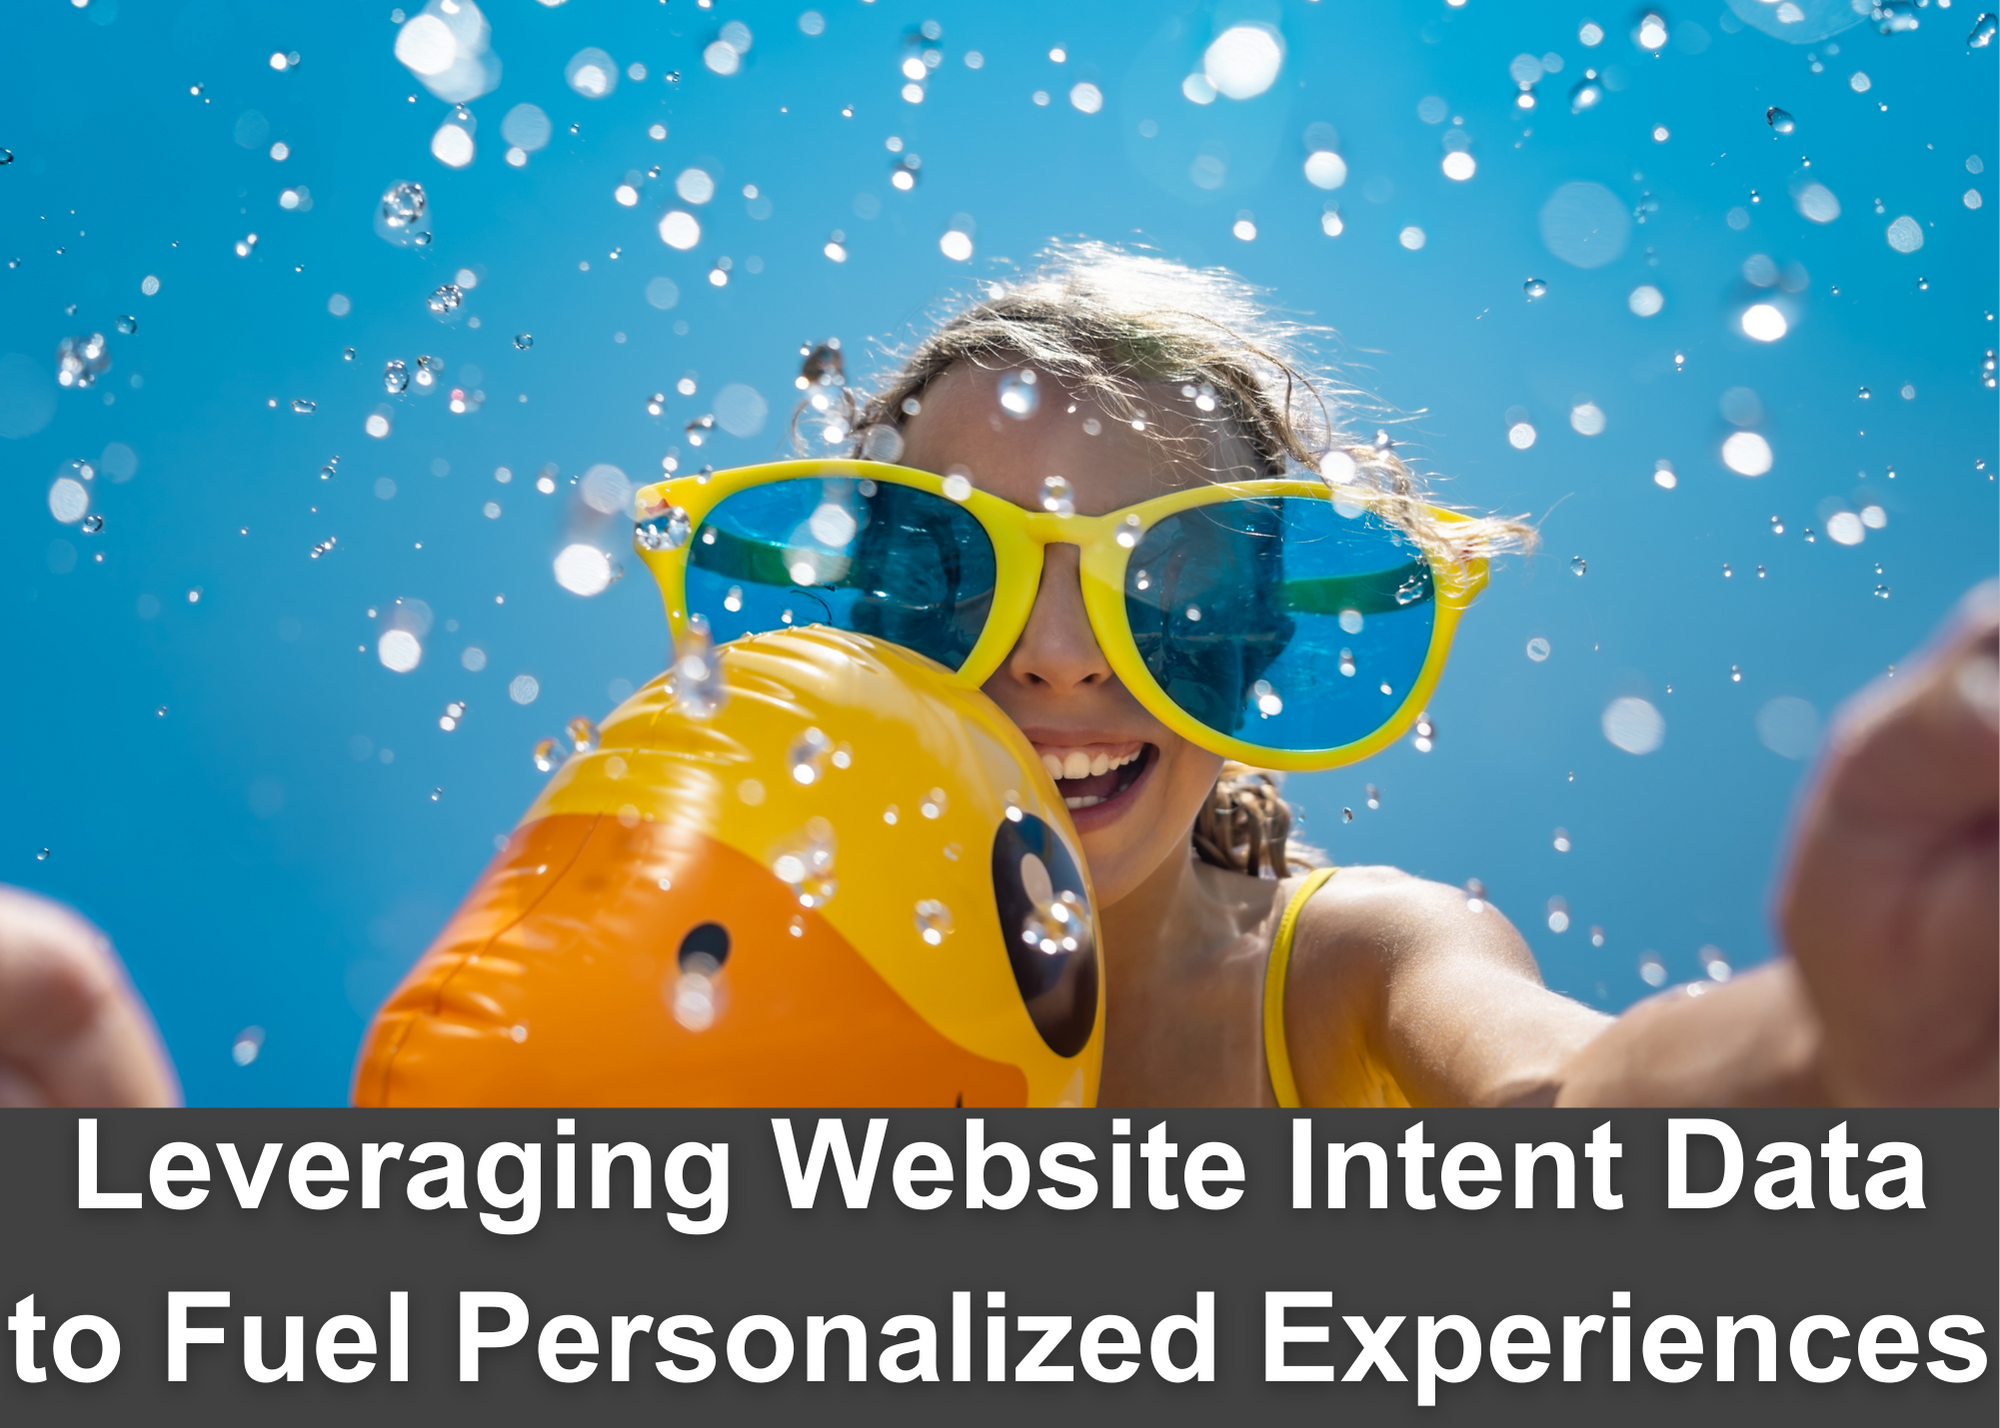 Leveraging Website Intent Data to Fuel Personalized Experiences